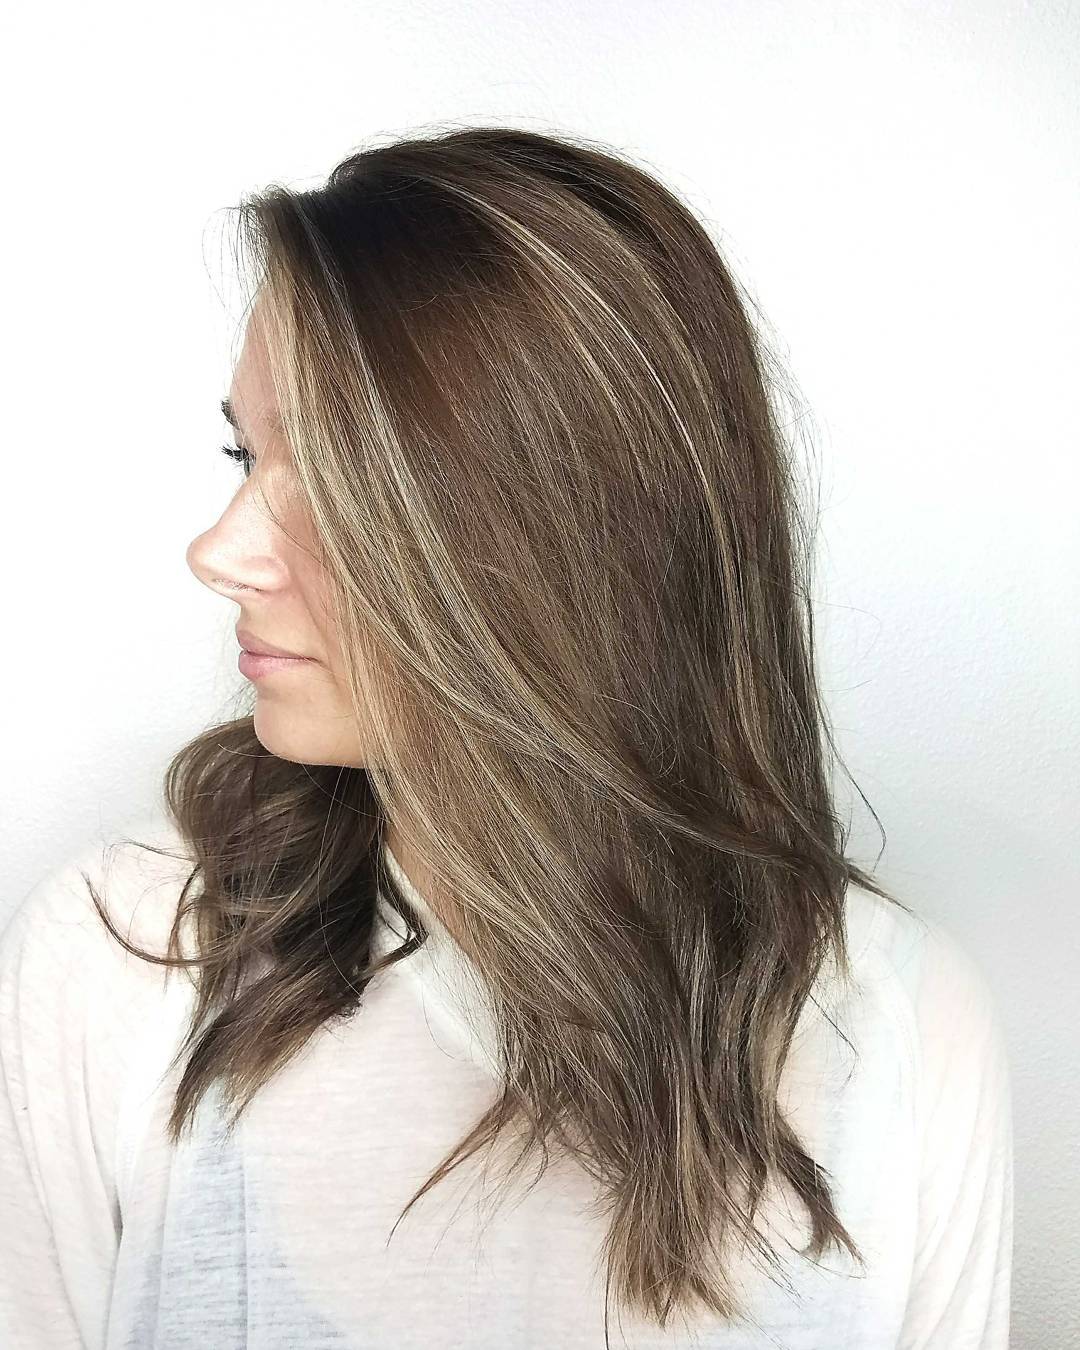 25 Light Brown Hair with Highlights Ideas For Brunettes